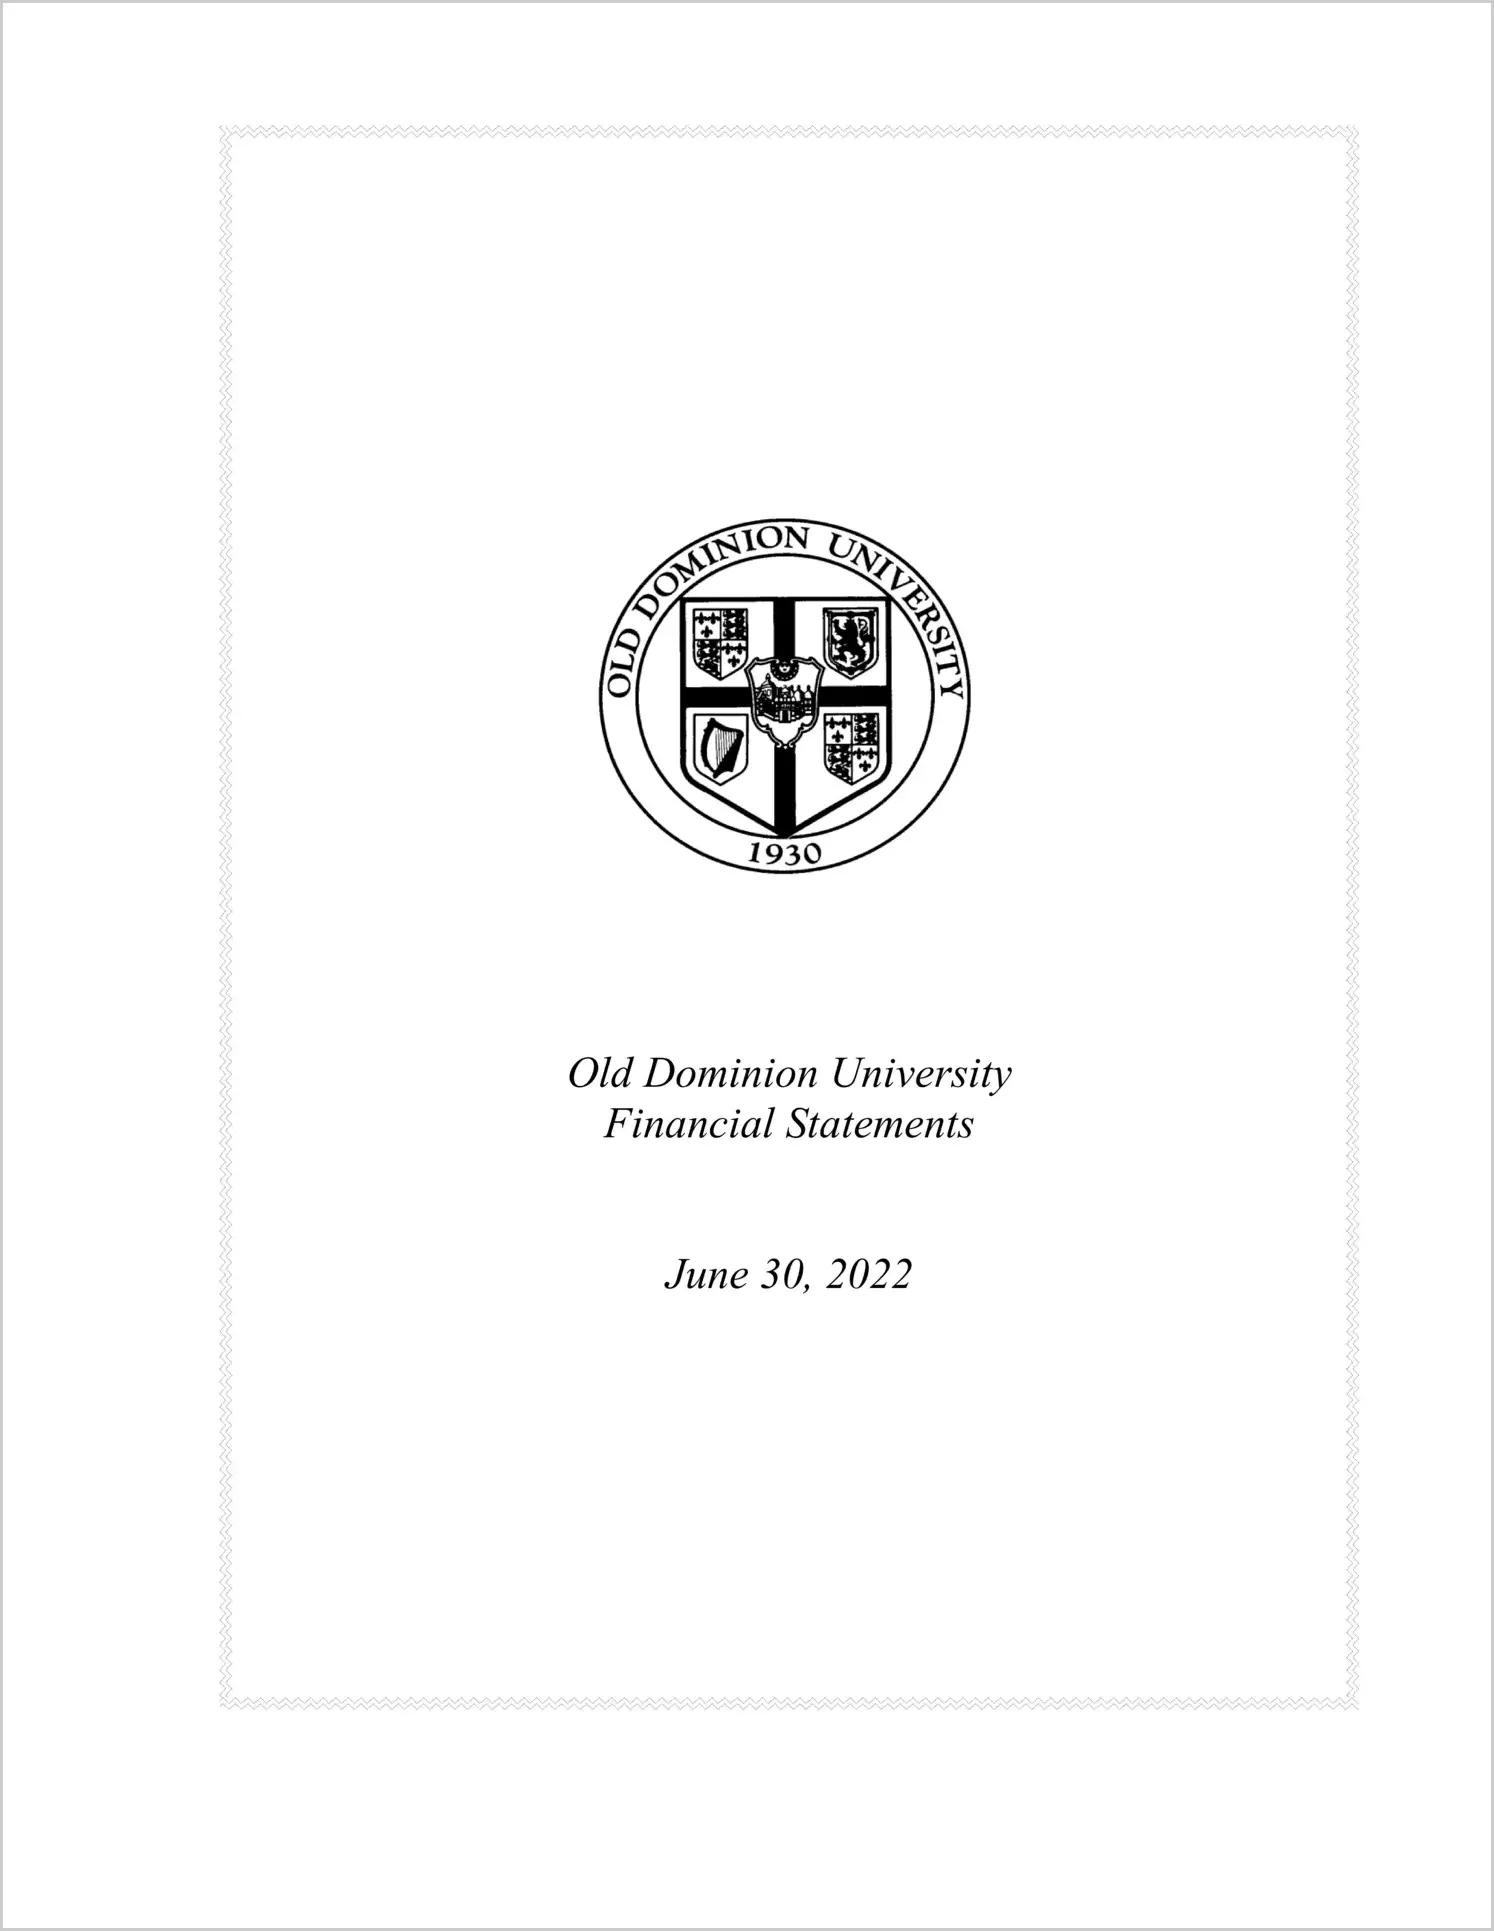 Old Dominion University Financial Statements for the year ended June 30, 2022